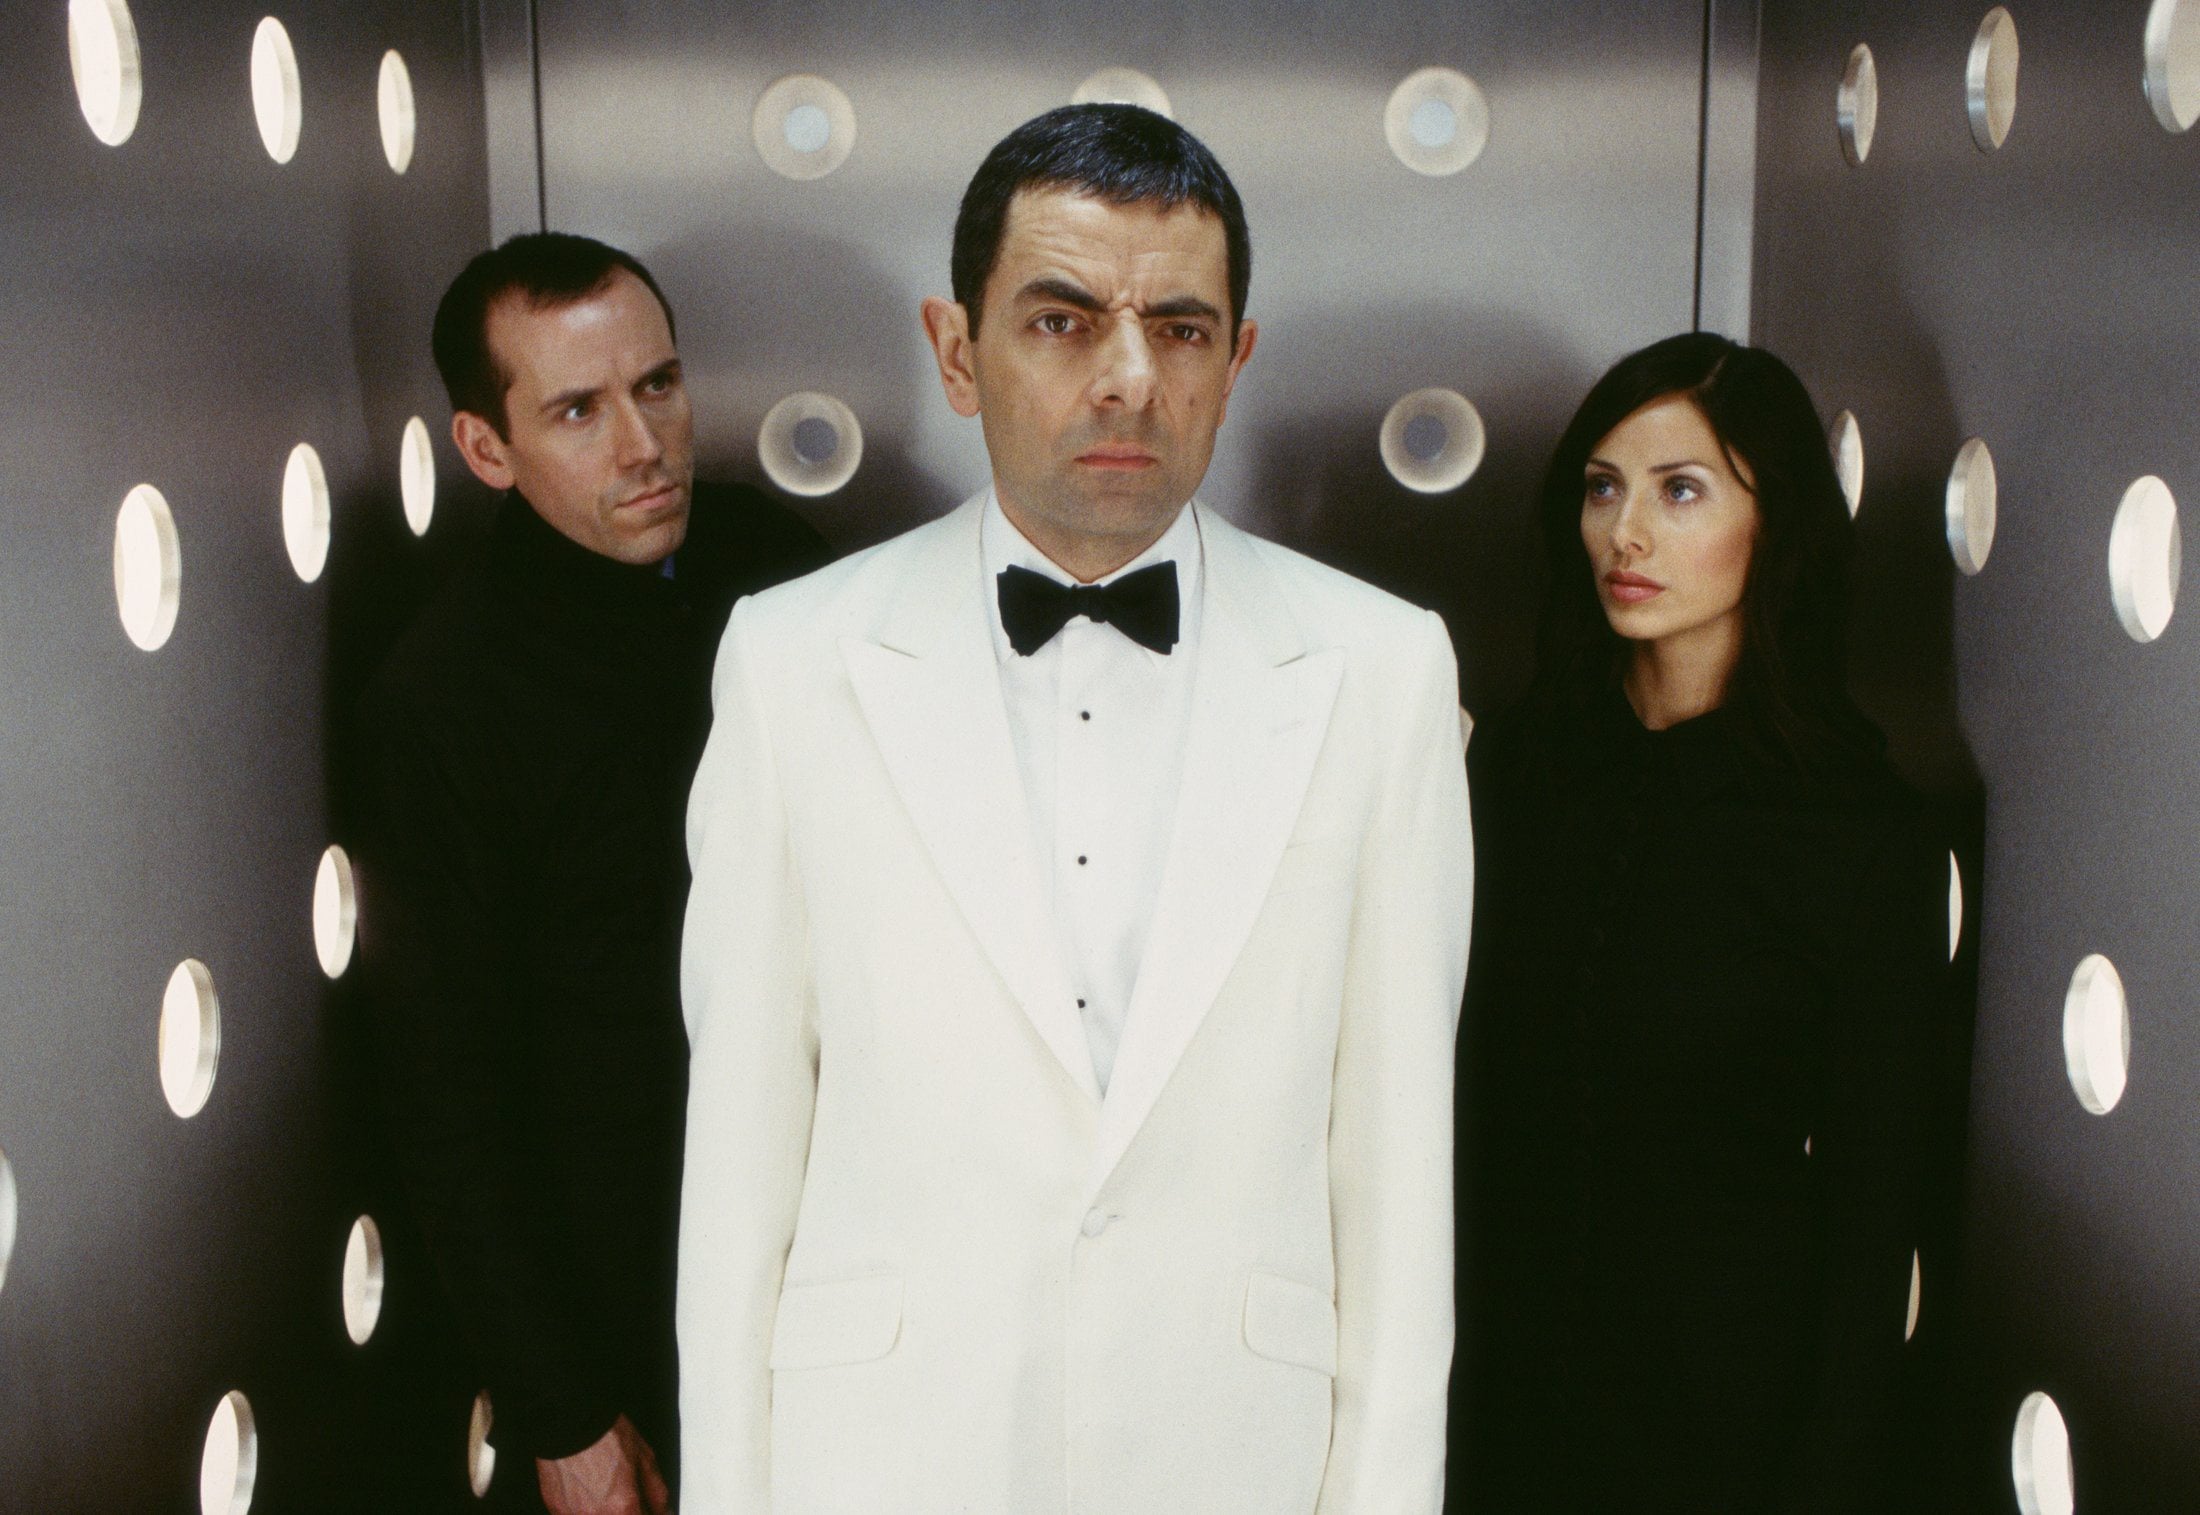 Judging by the expression on his face, Rowan Atkinson, aka &quot;Johnny English,&quot; center, looks about ready for an anti-Valentine&#039;s Party.